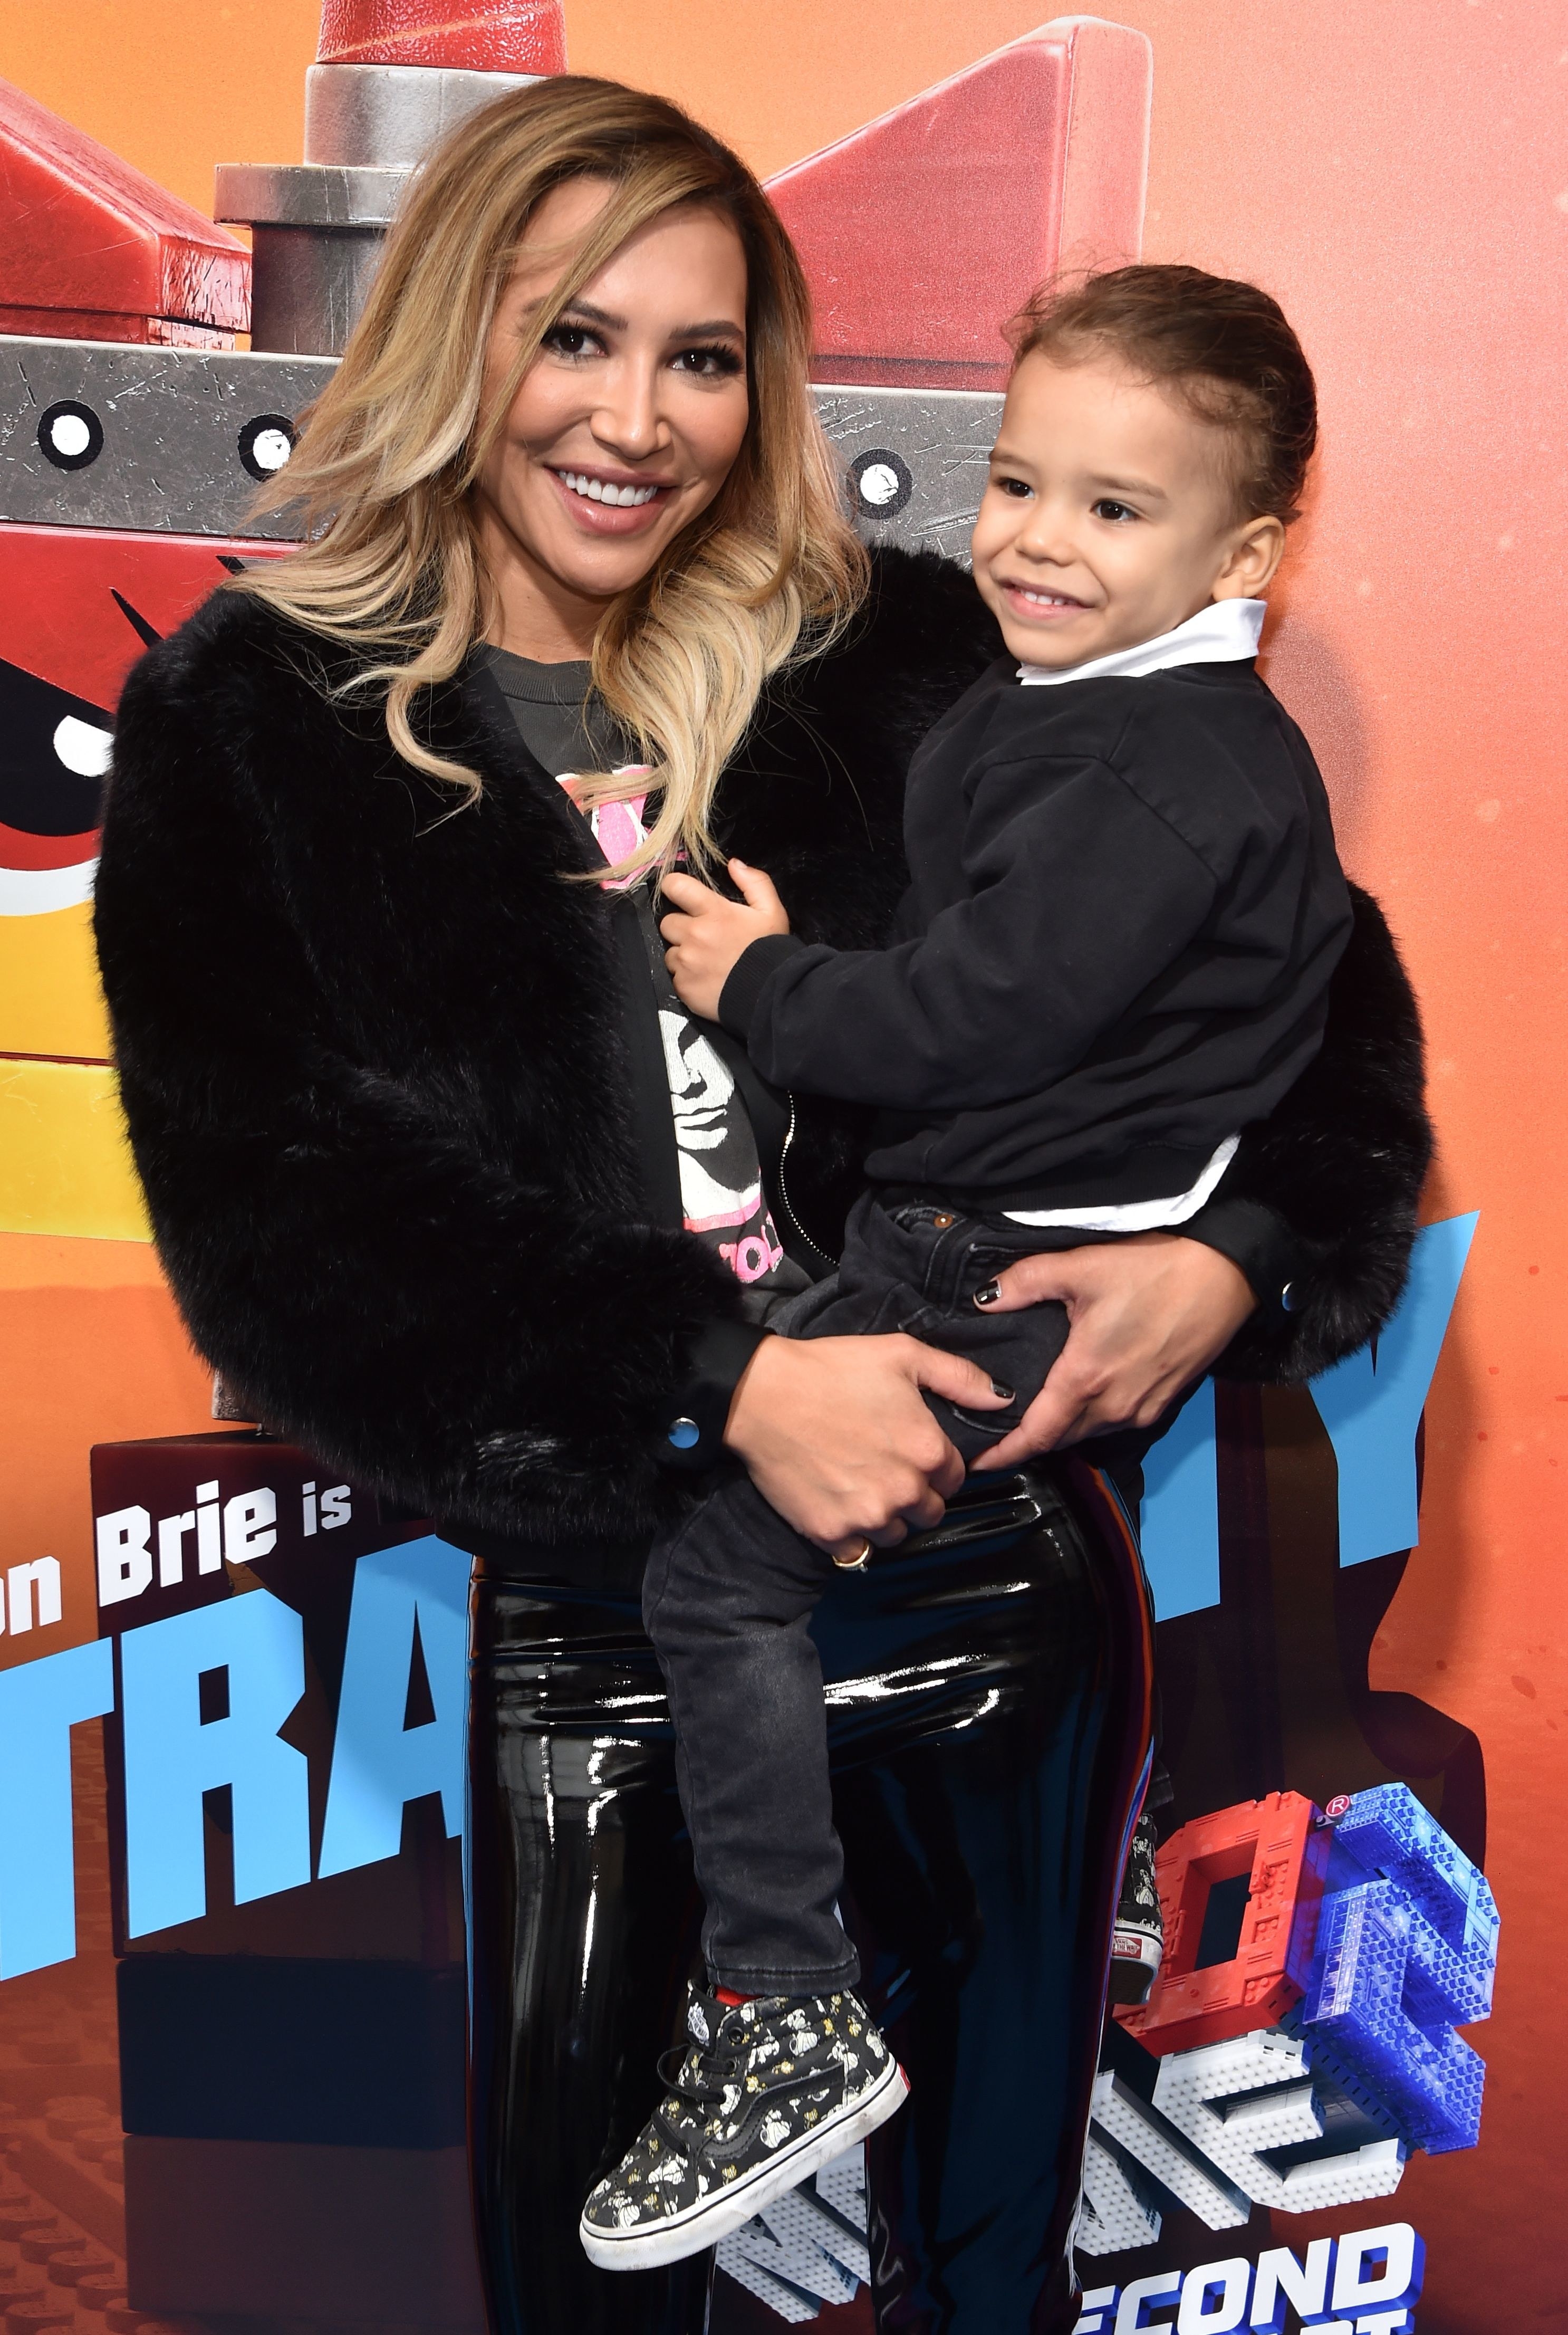 Naya Rivera holds her son Josey up to her, while both smile warmly.